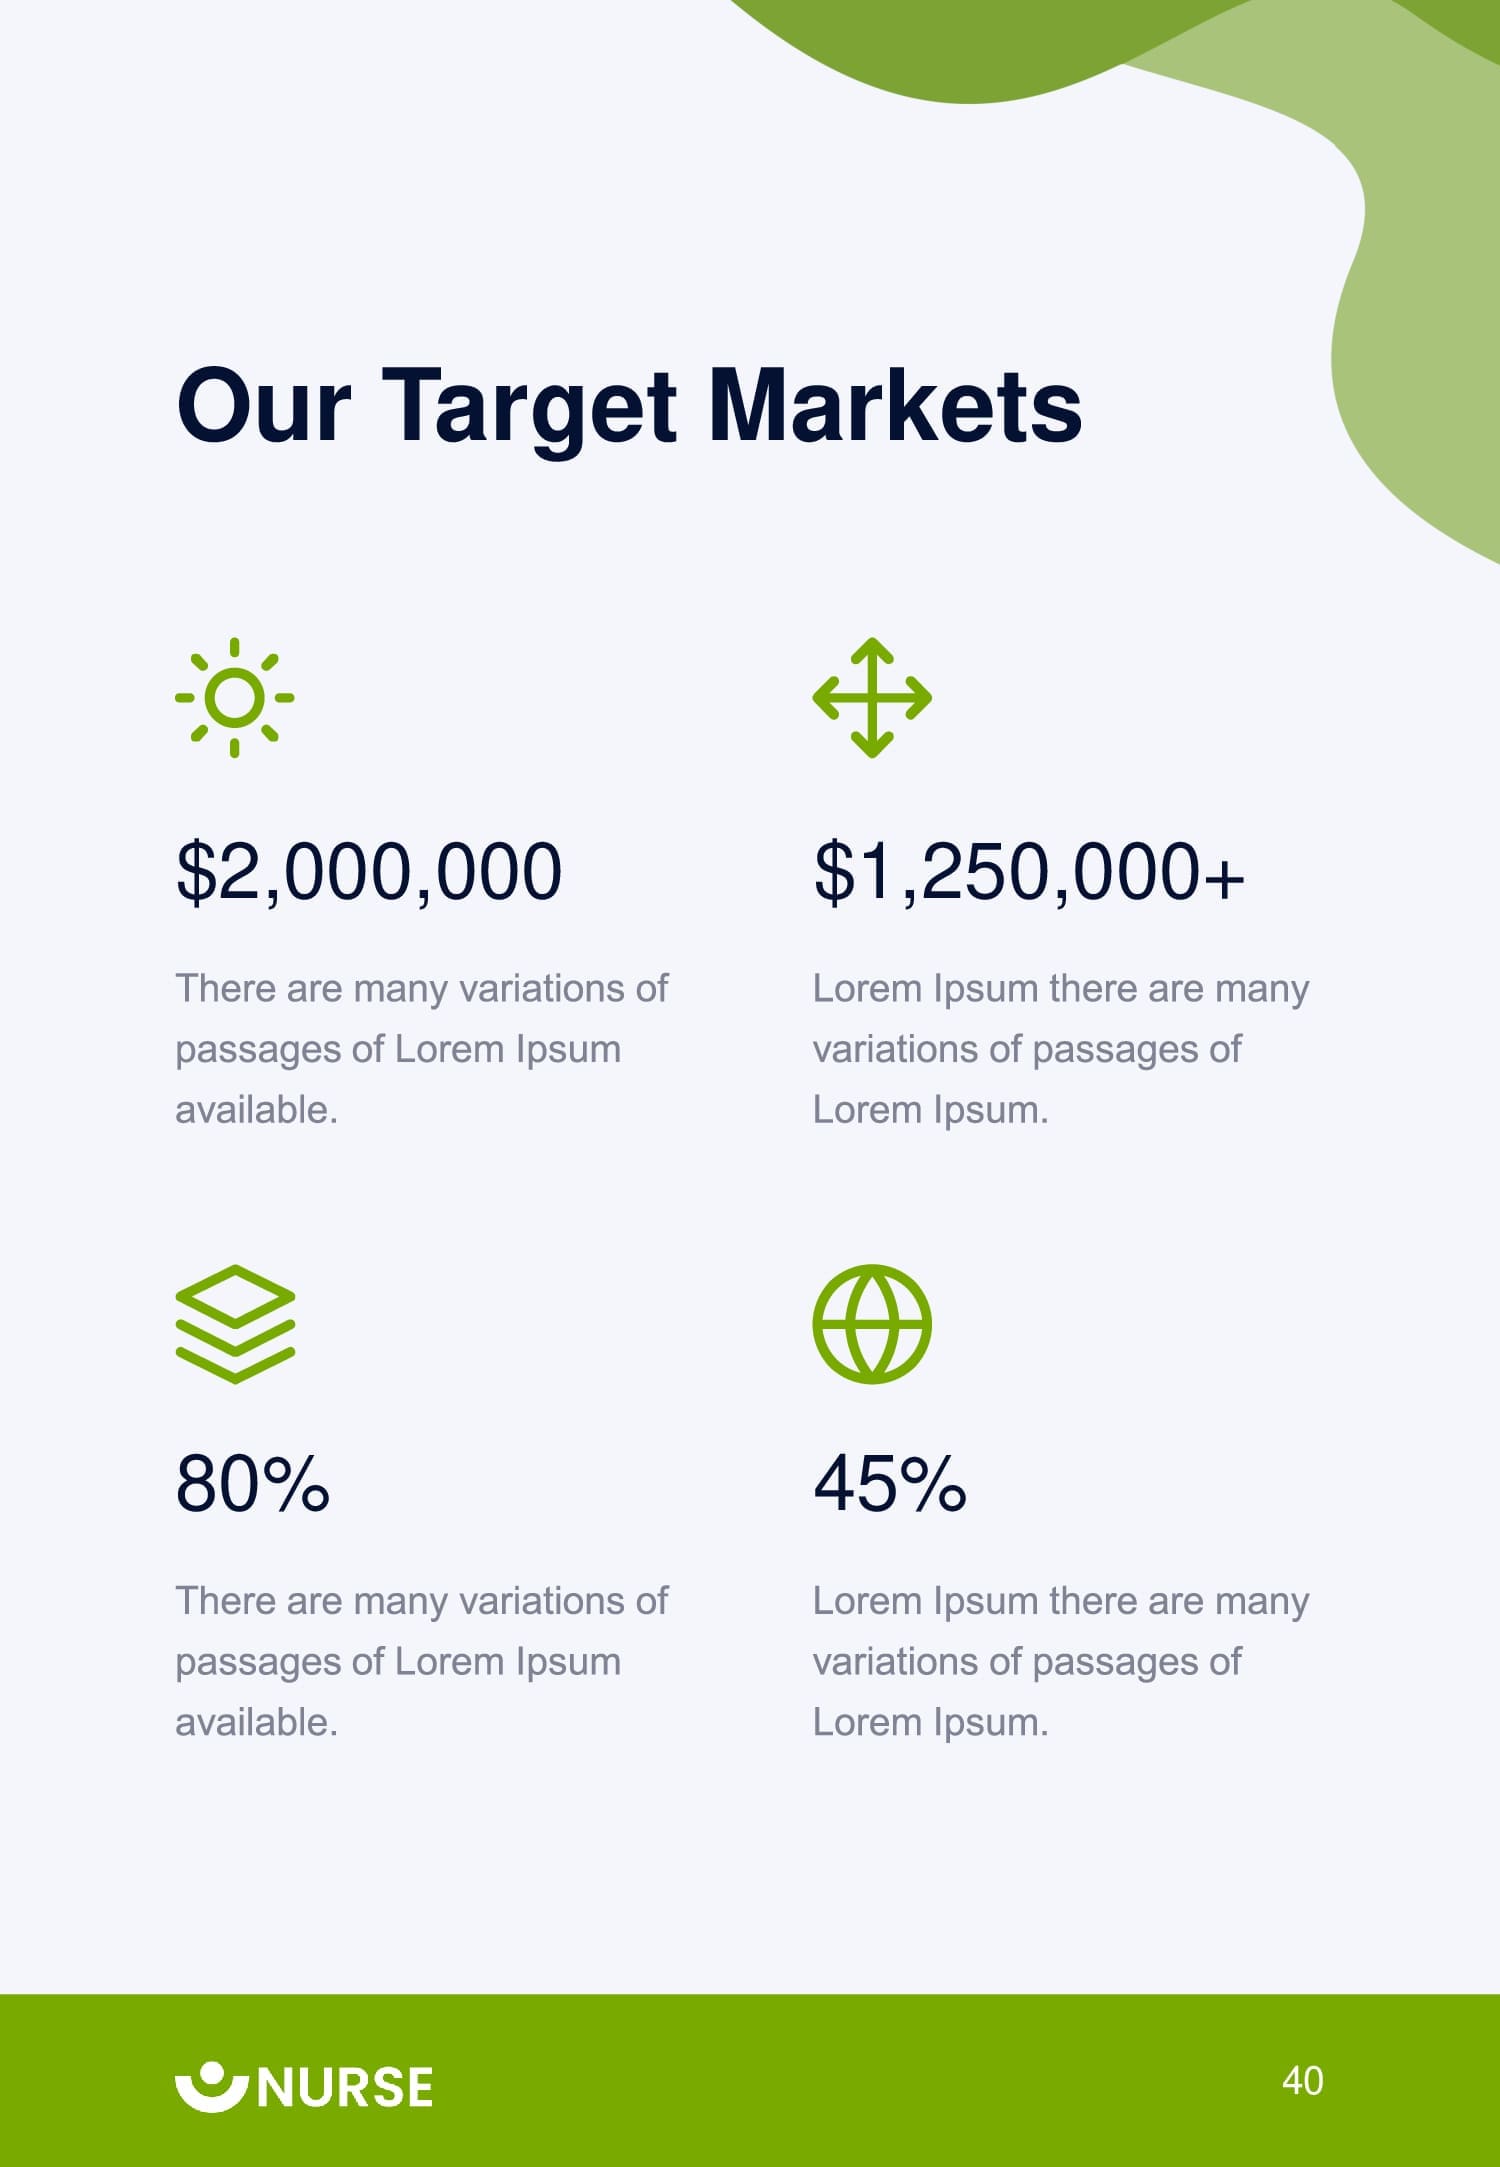 Our target markets.